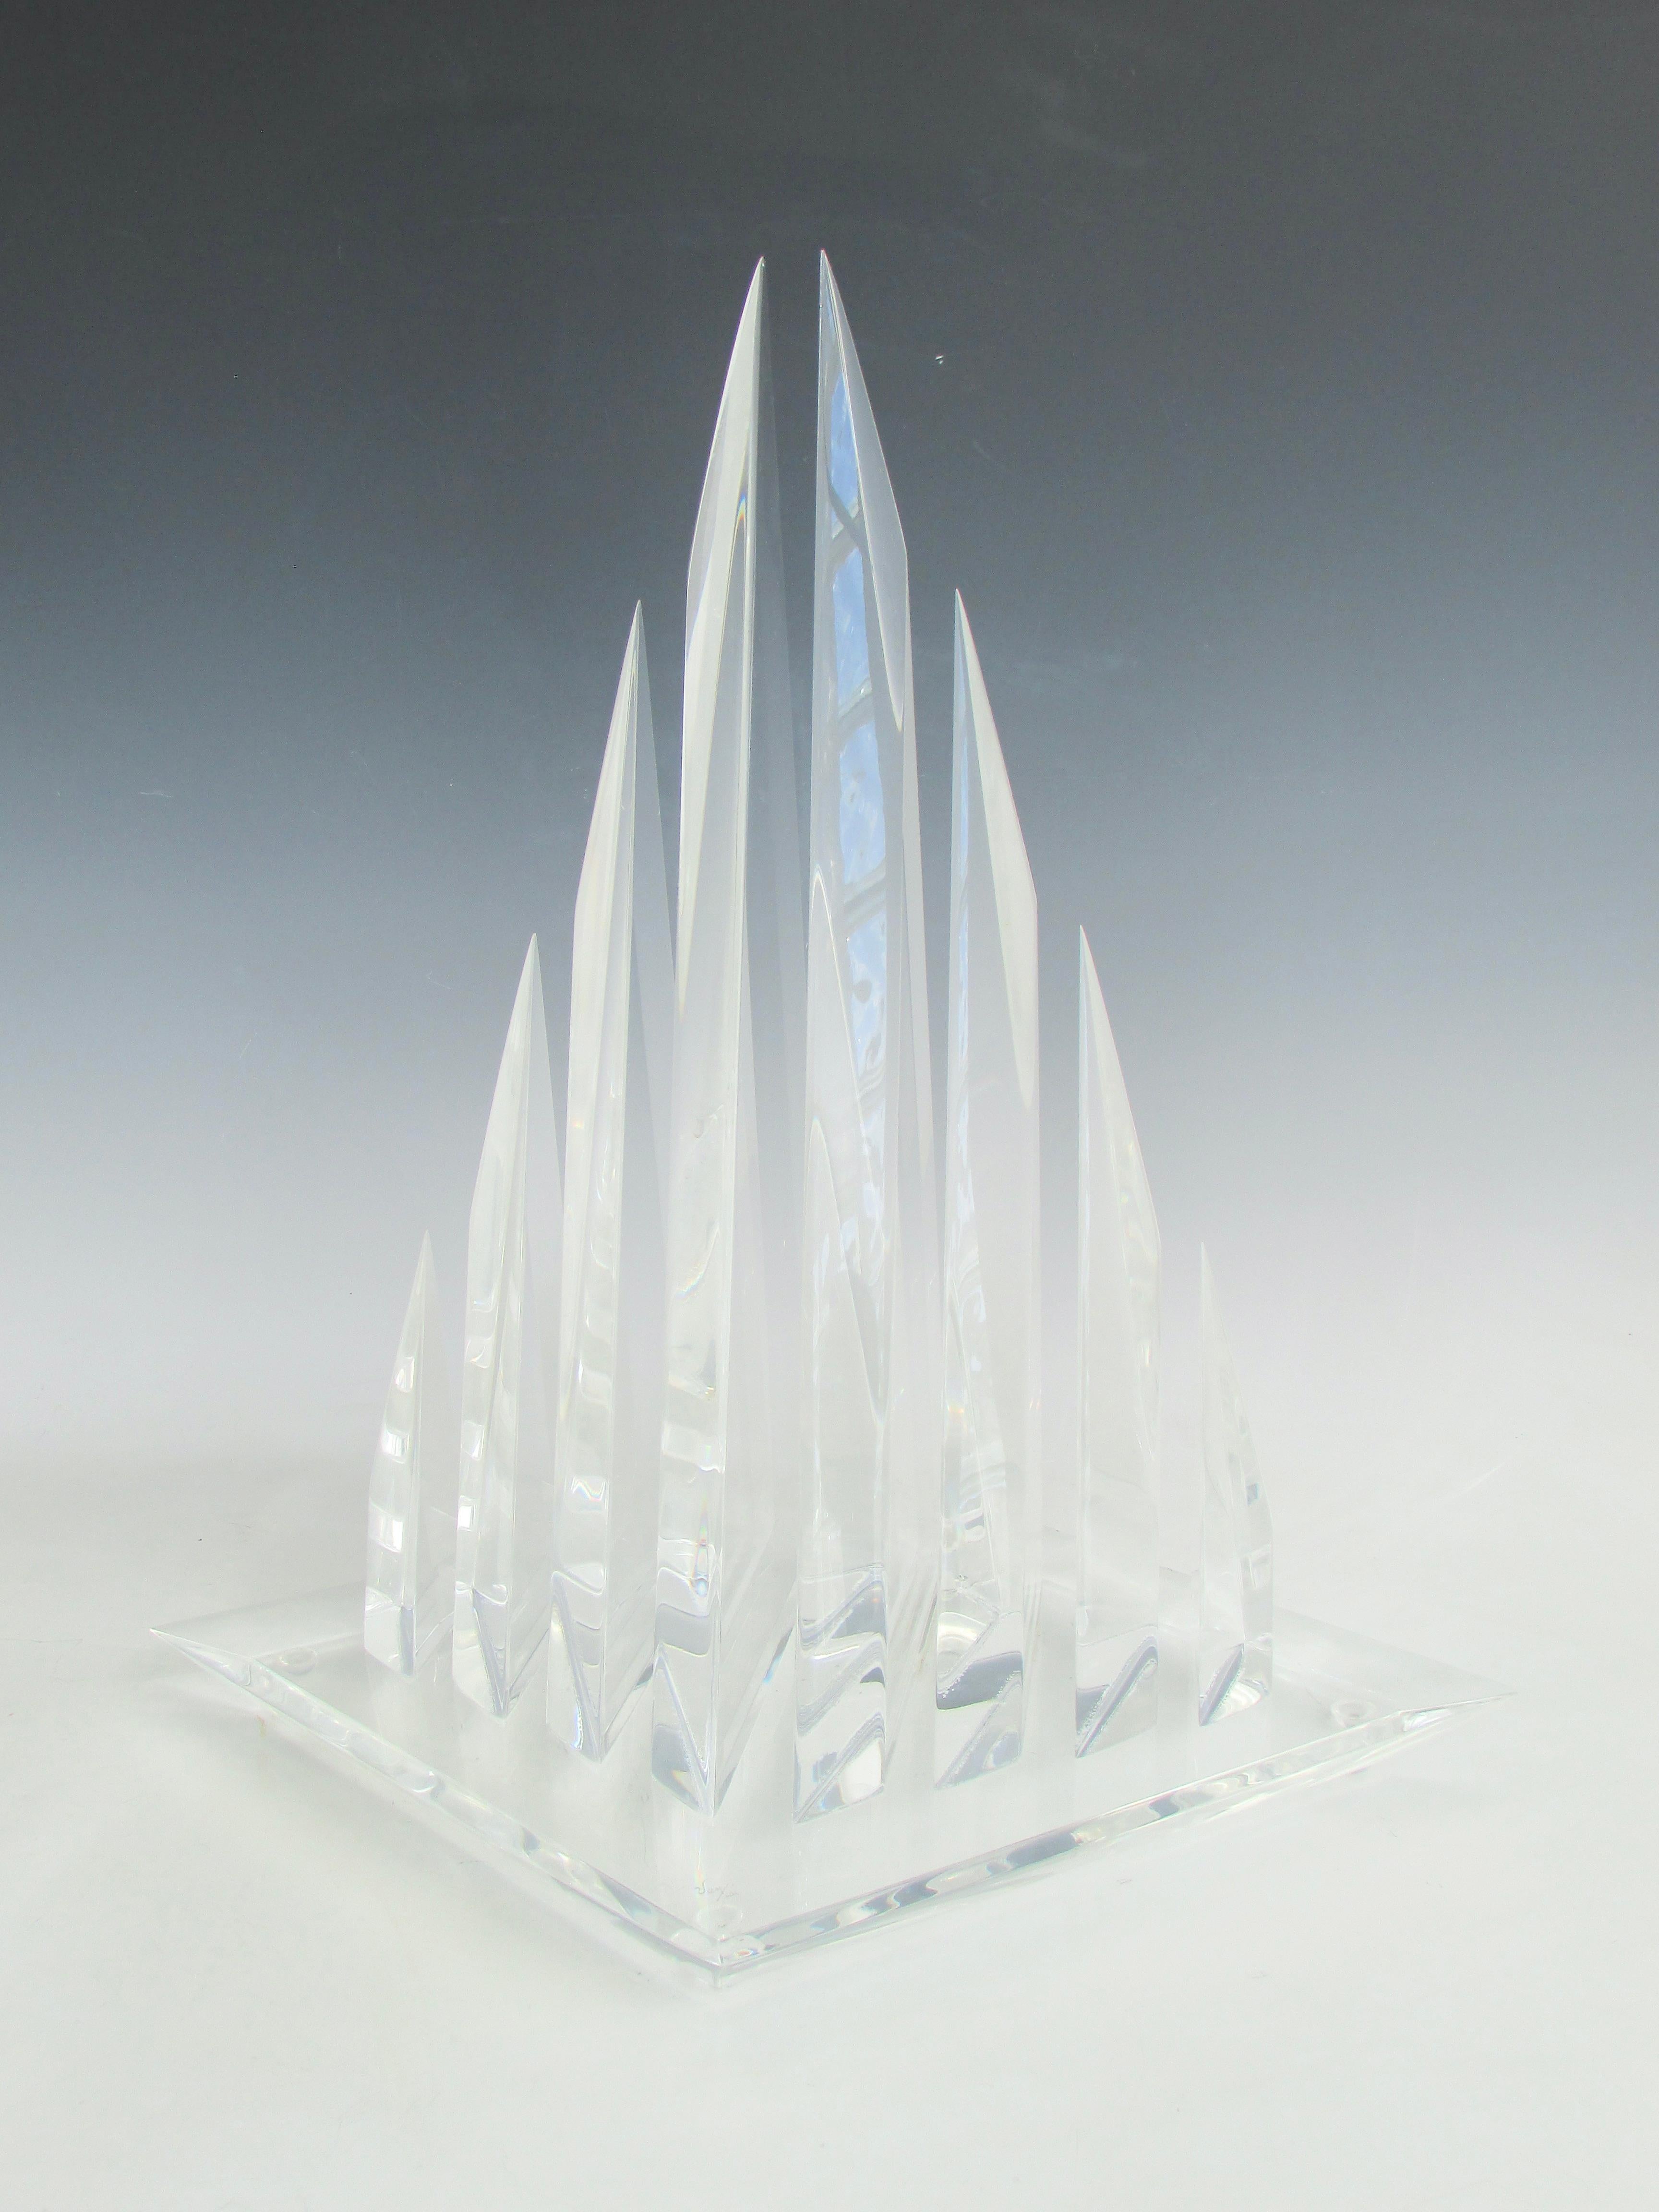 Acrylic Hivo Van Teal Segmented Lucite Pyramid, Triangle Sculpture For Sale